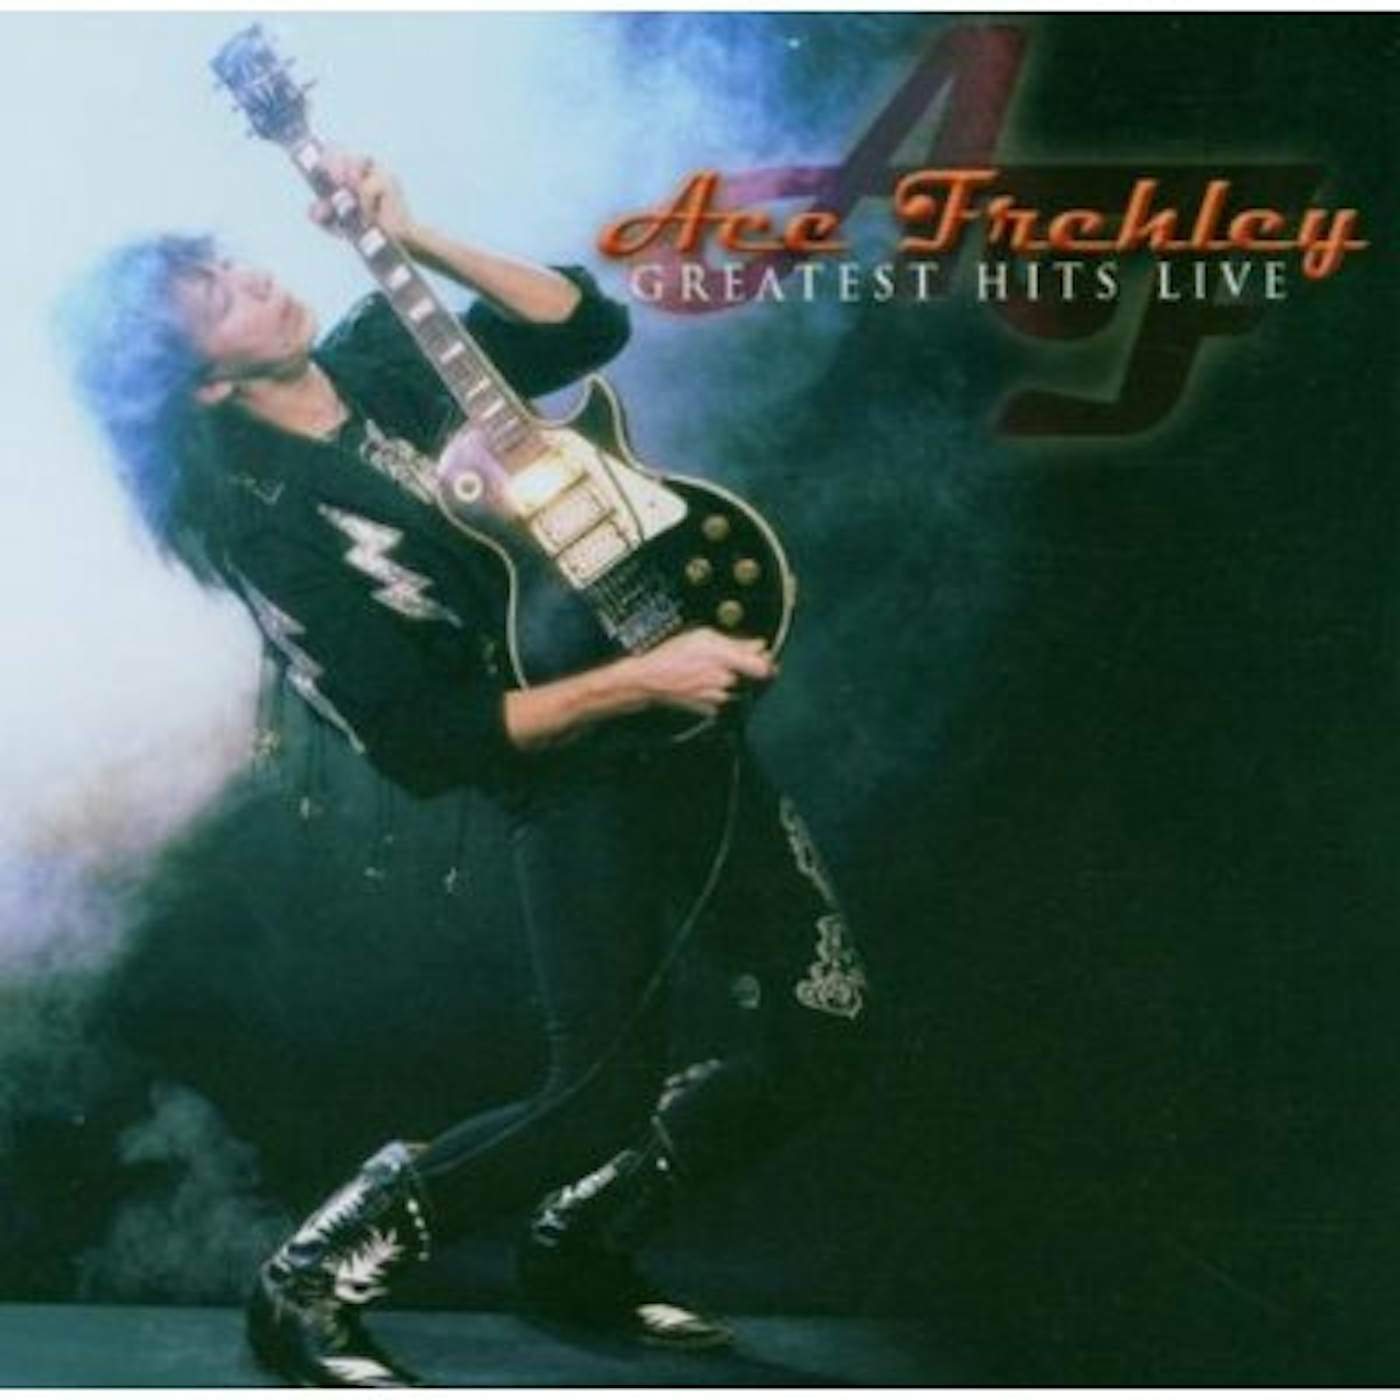 Ace Frehley GREATEST HITS LIVE CD